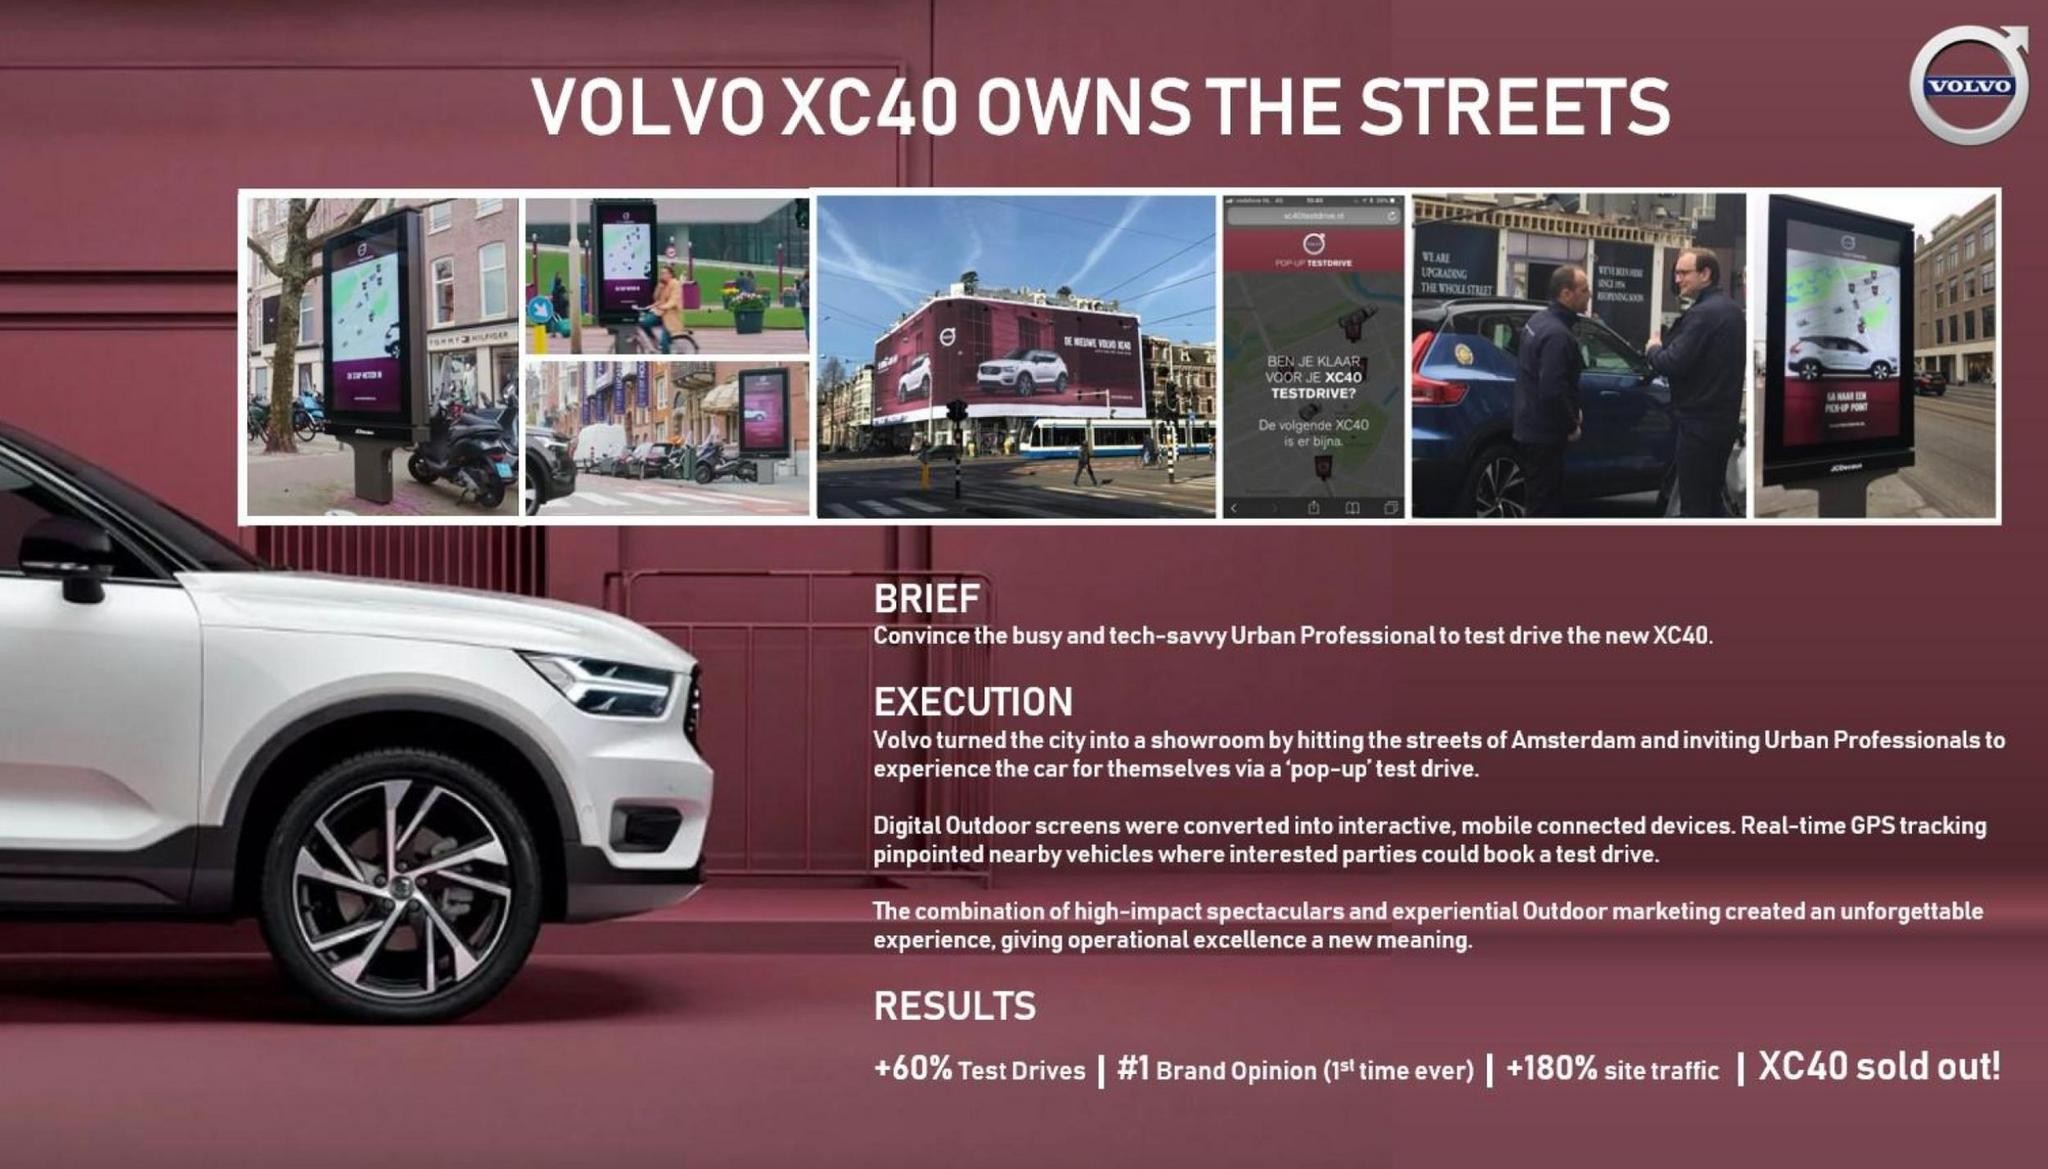 Volvo XC40 Owns The Streets 